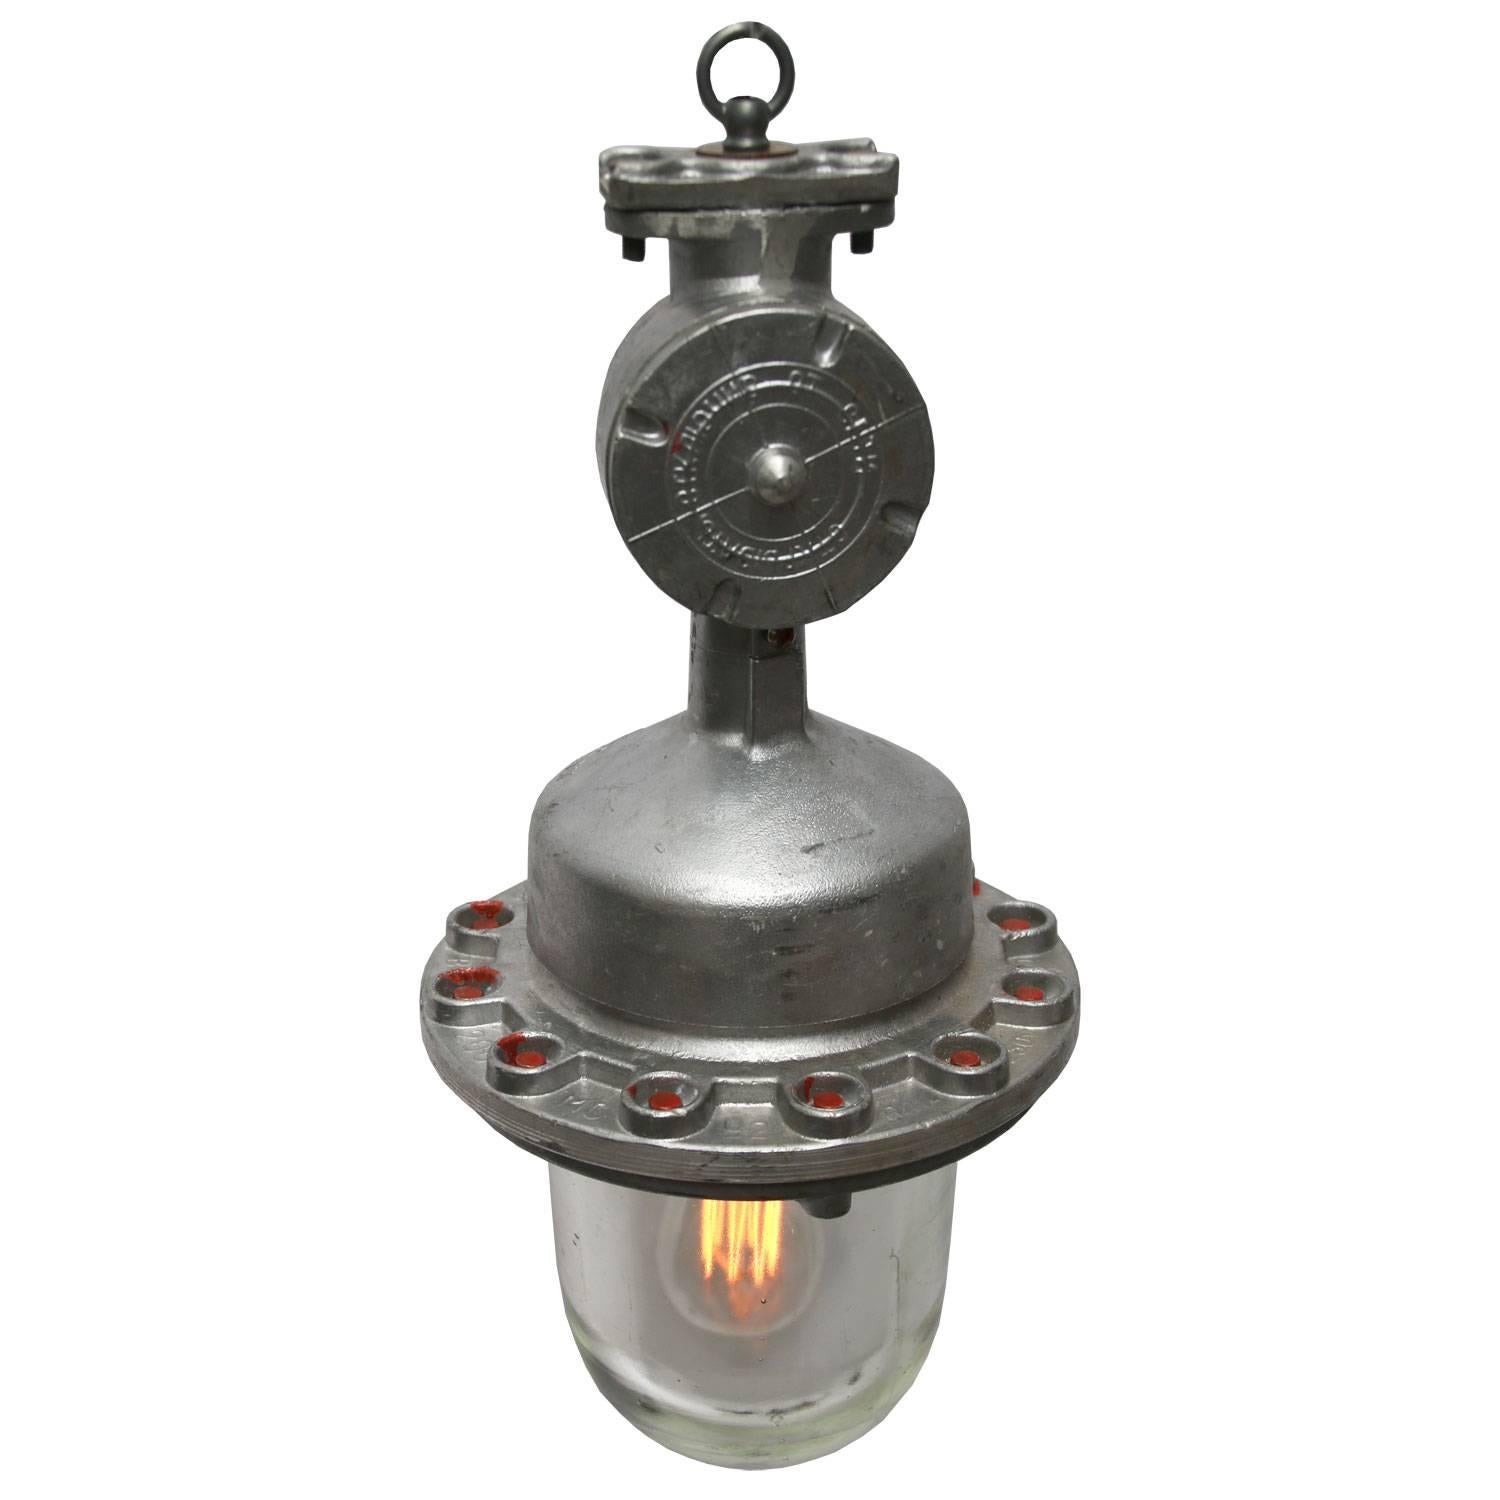 Industrial hanging lamp. Silver grey cast aluminium. Clear glass.

Weight: 7.0 kg / 15.4 lb

All lamps have been made suitable by international standards for incandescent light bulbs, energy-efficient and LED bulbs. E26/E27 bulb holders and new